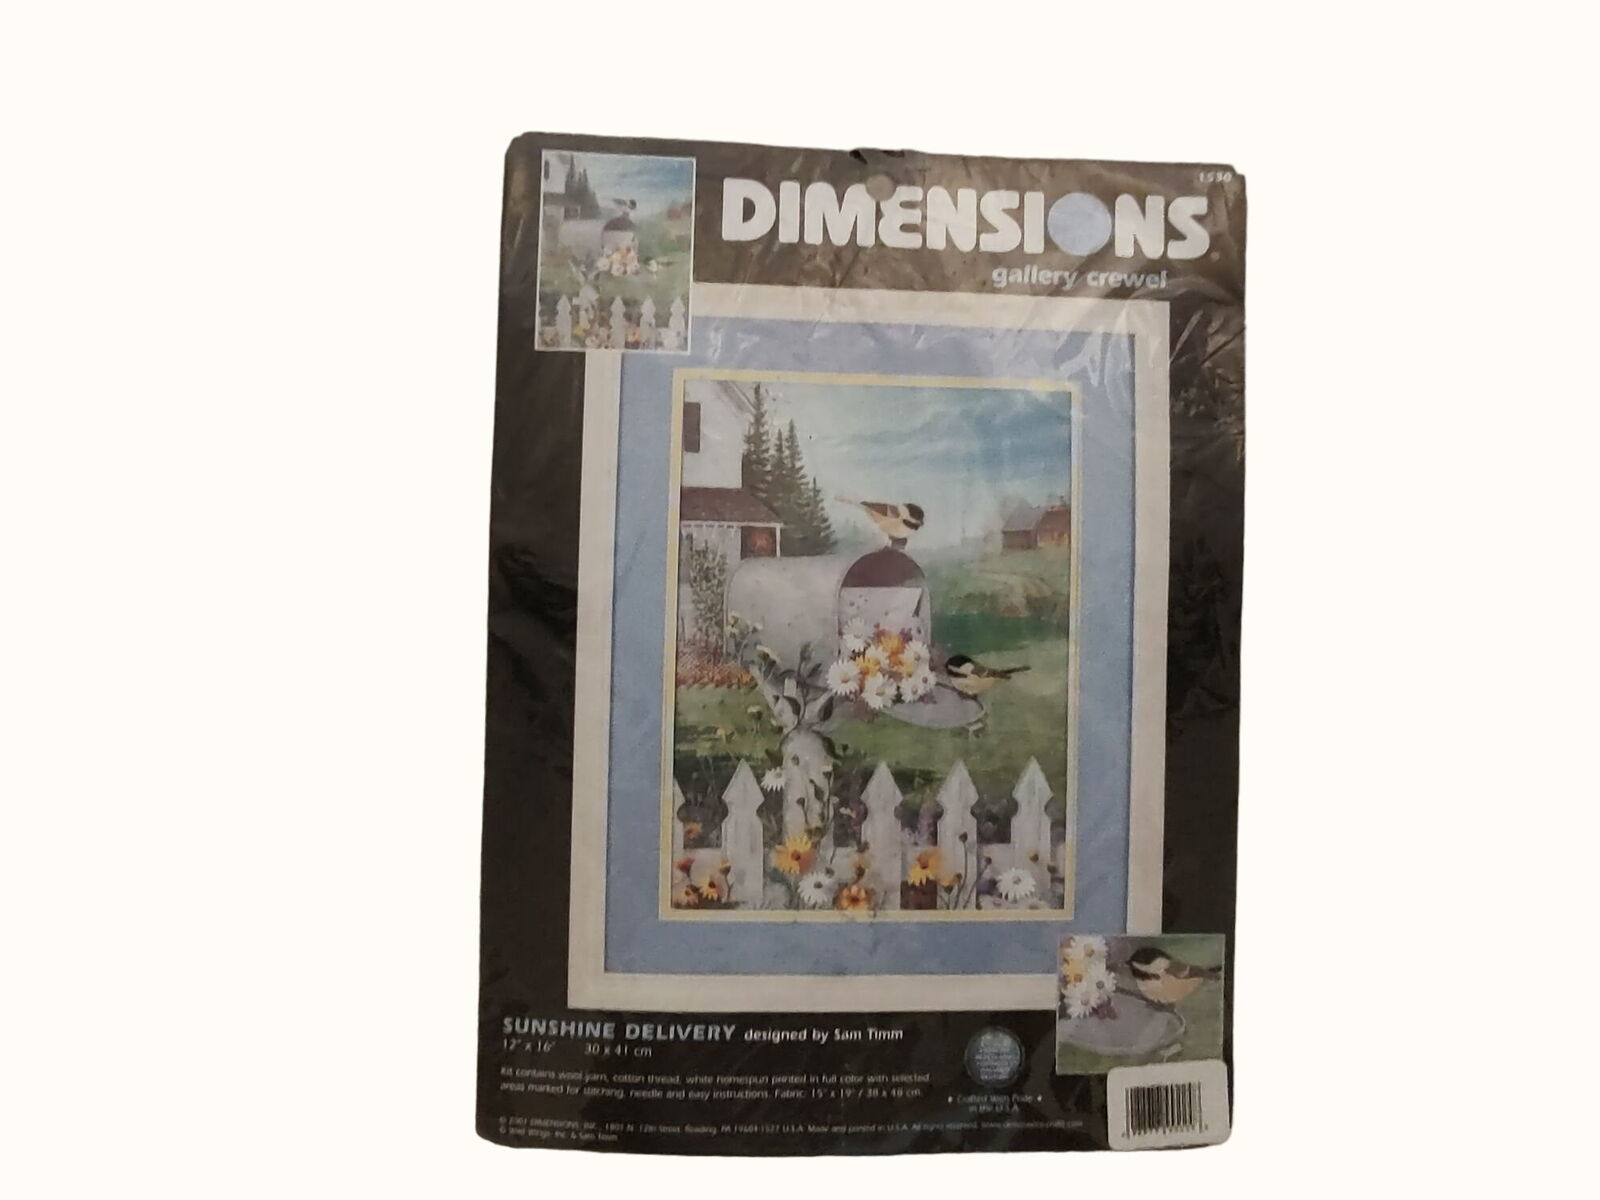 2001 Dimensions Crewel Embroidery Kit Sunshine Delivery Complete Opened #1530 - $18.76